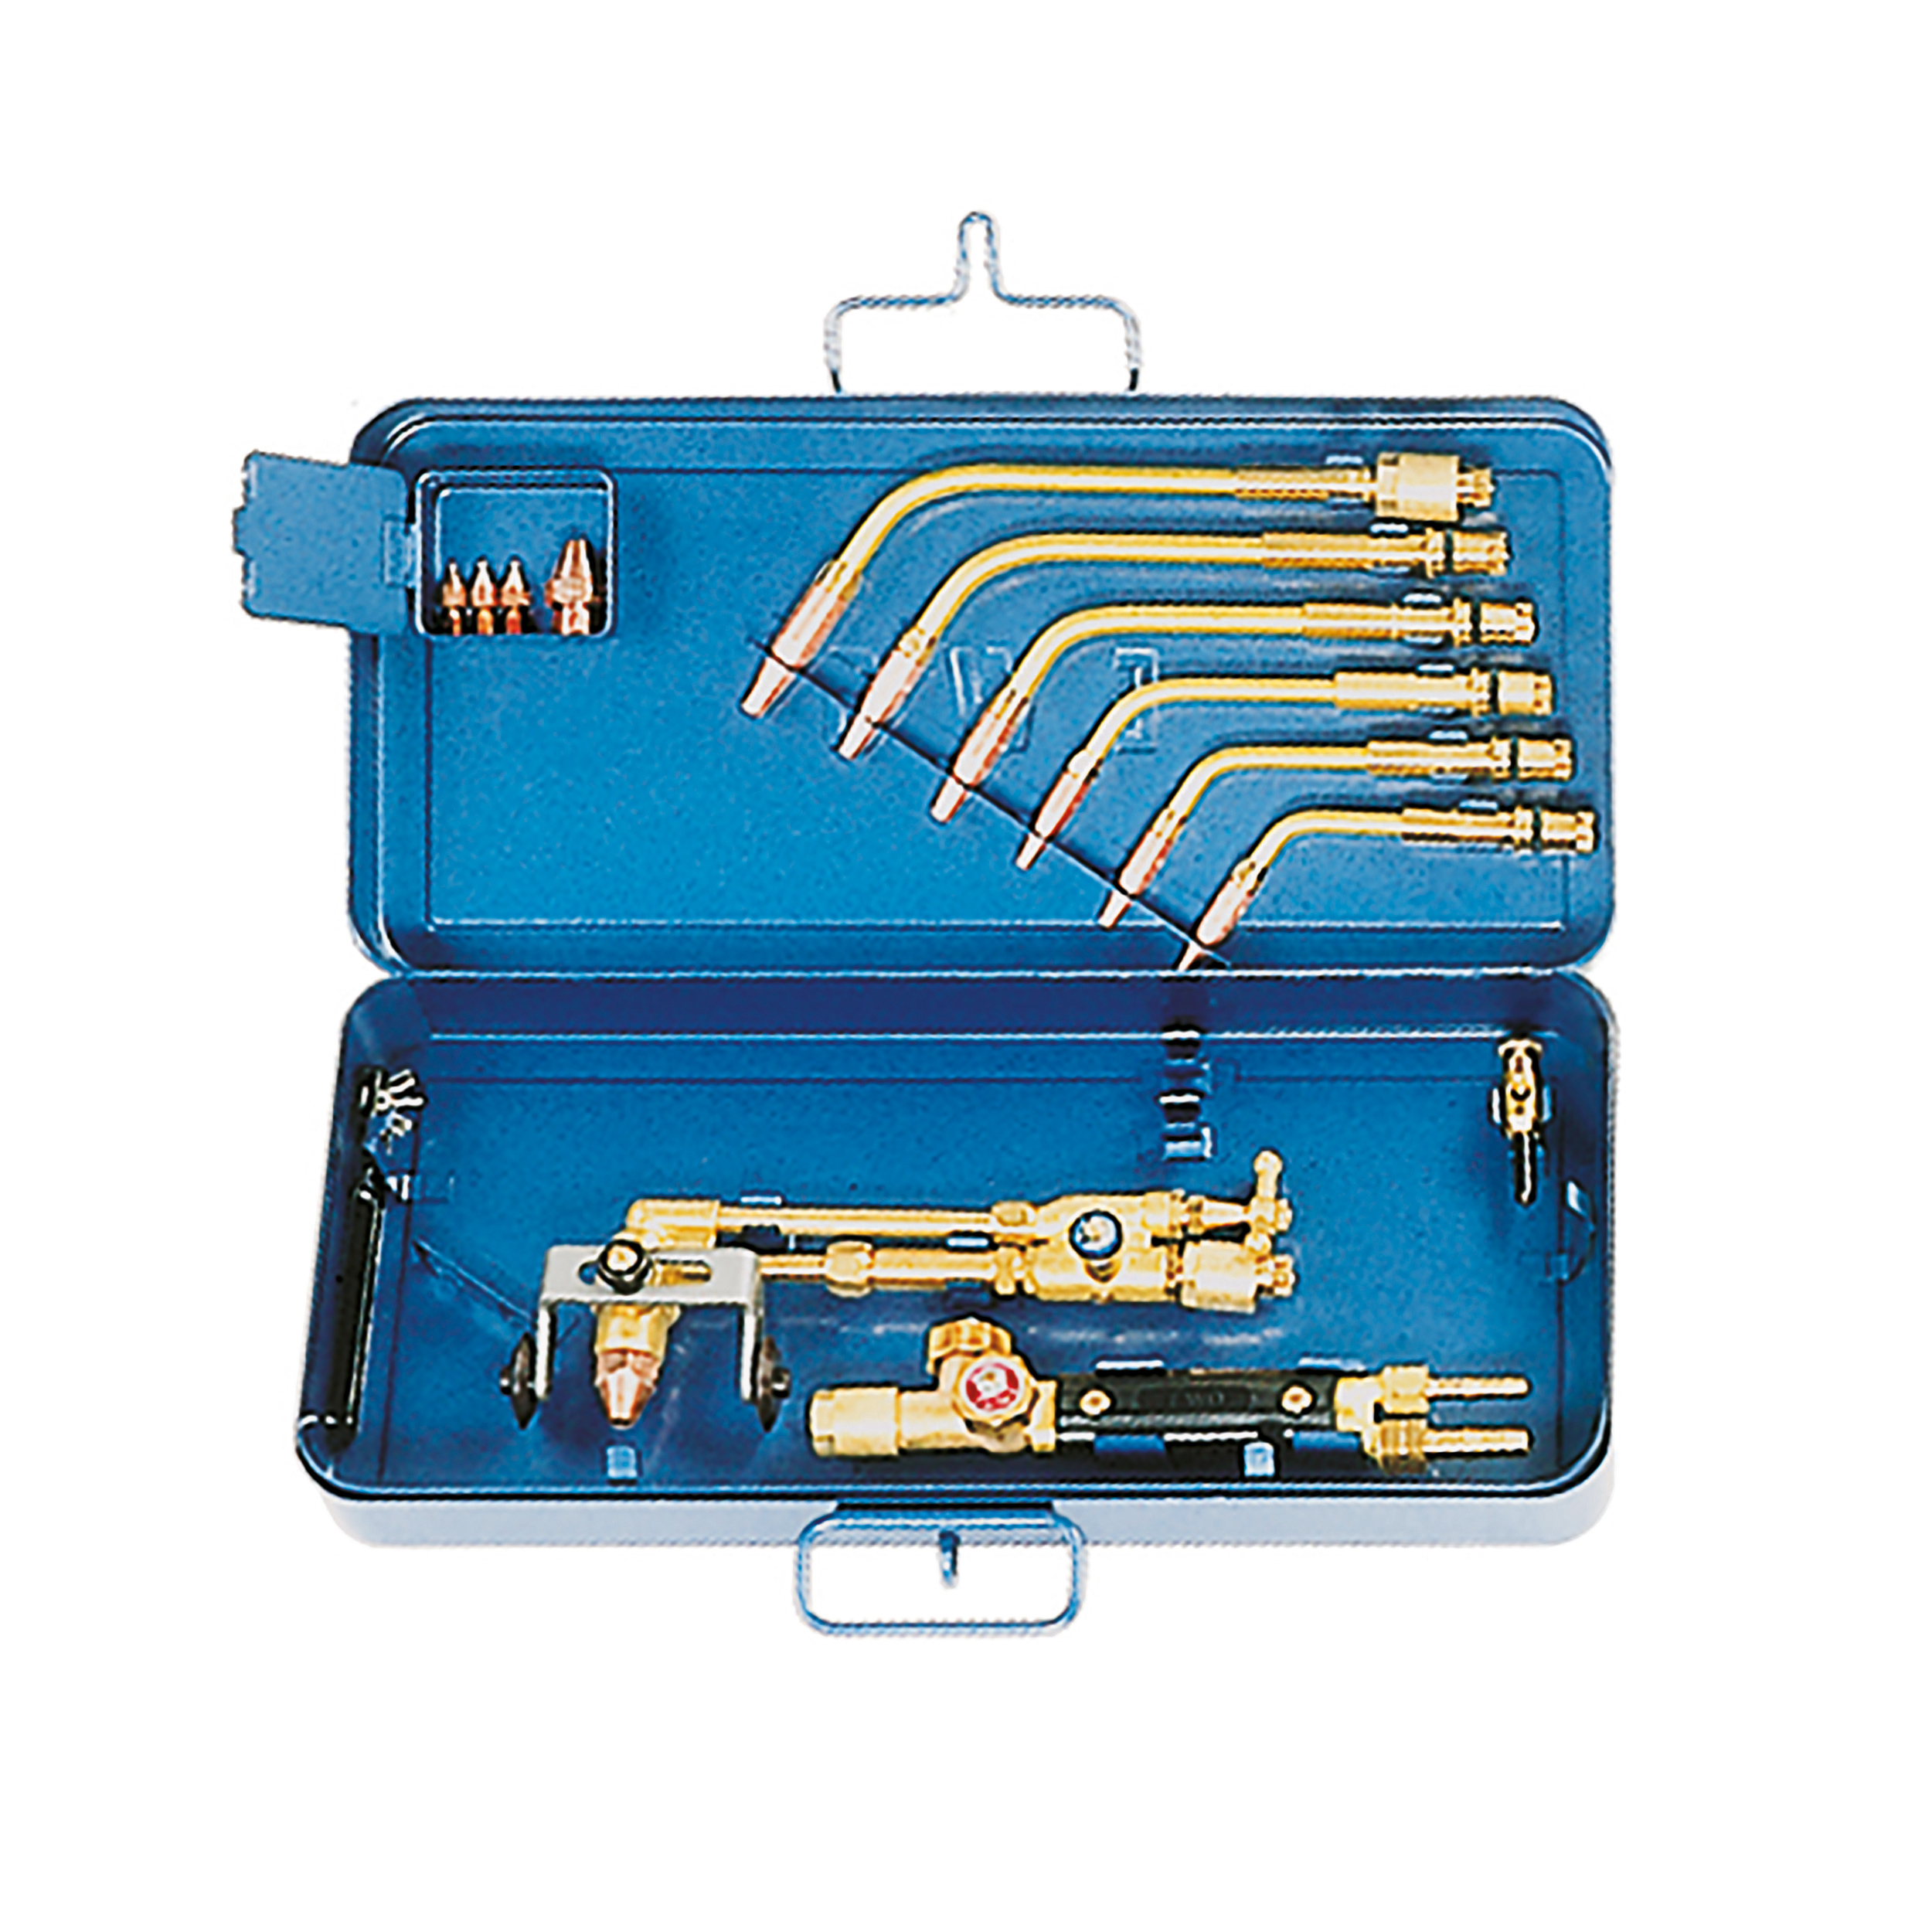 Propane set f. warming-up, 6 warming ins. 0.5 – 14 mm, wing ins. 3 – 100 mm with ring nozzles, handle piece with sleeve nut 17 mm